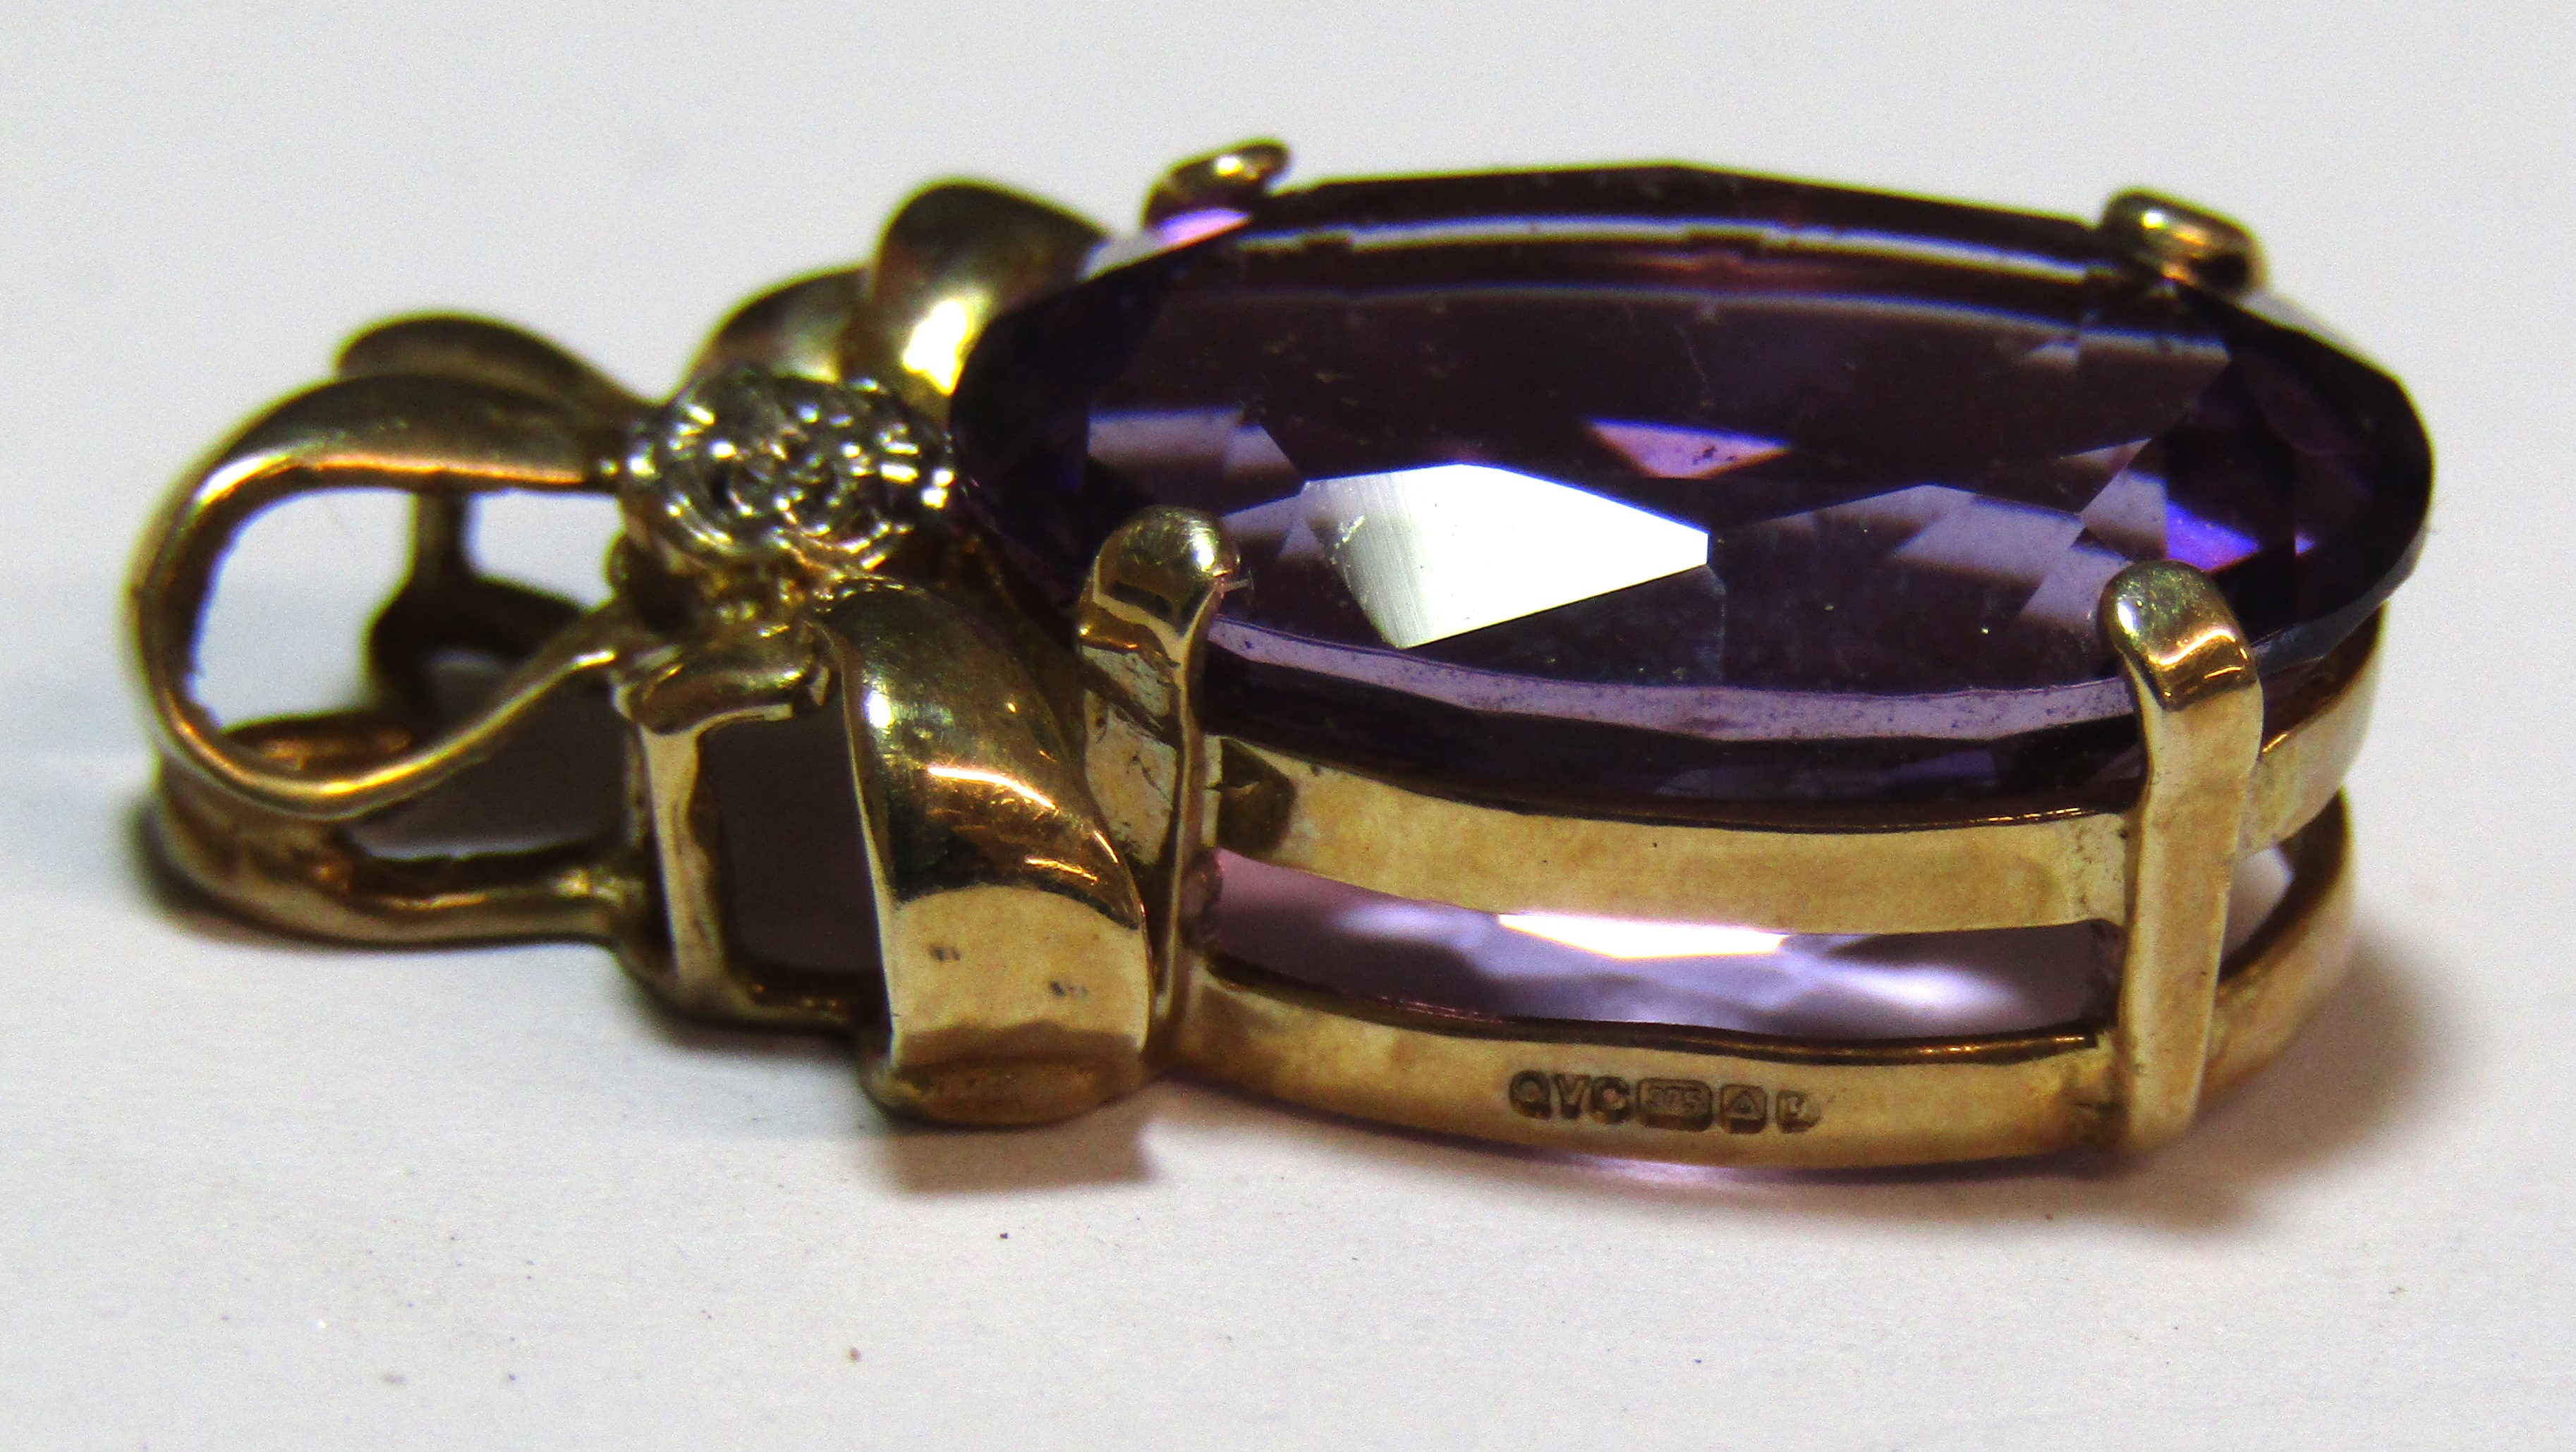 9ct gold pendant with amethyst and diamonds along with amethyst and pearl earrings in yellow - Image 6 of 6